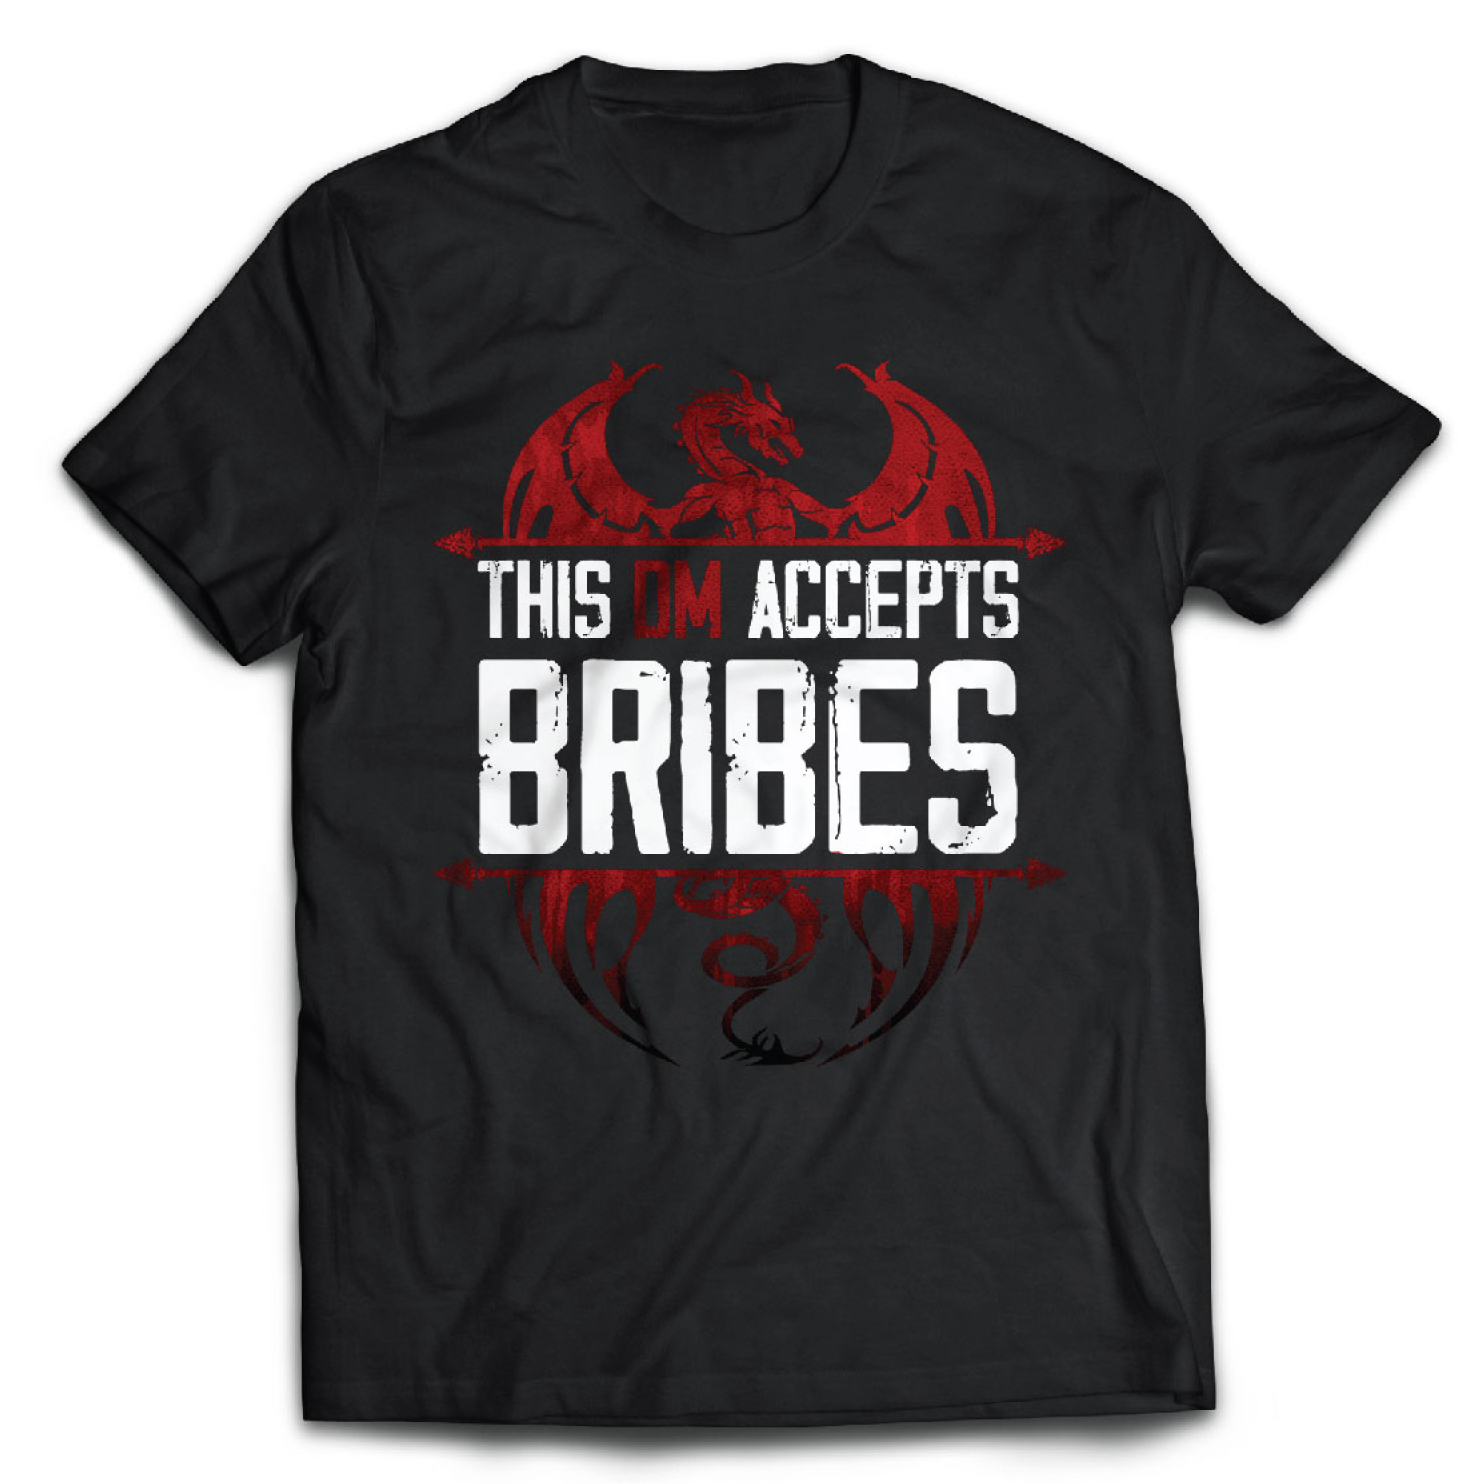 Black D&D T-Shirt featuring a red dragon design and the words 